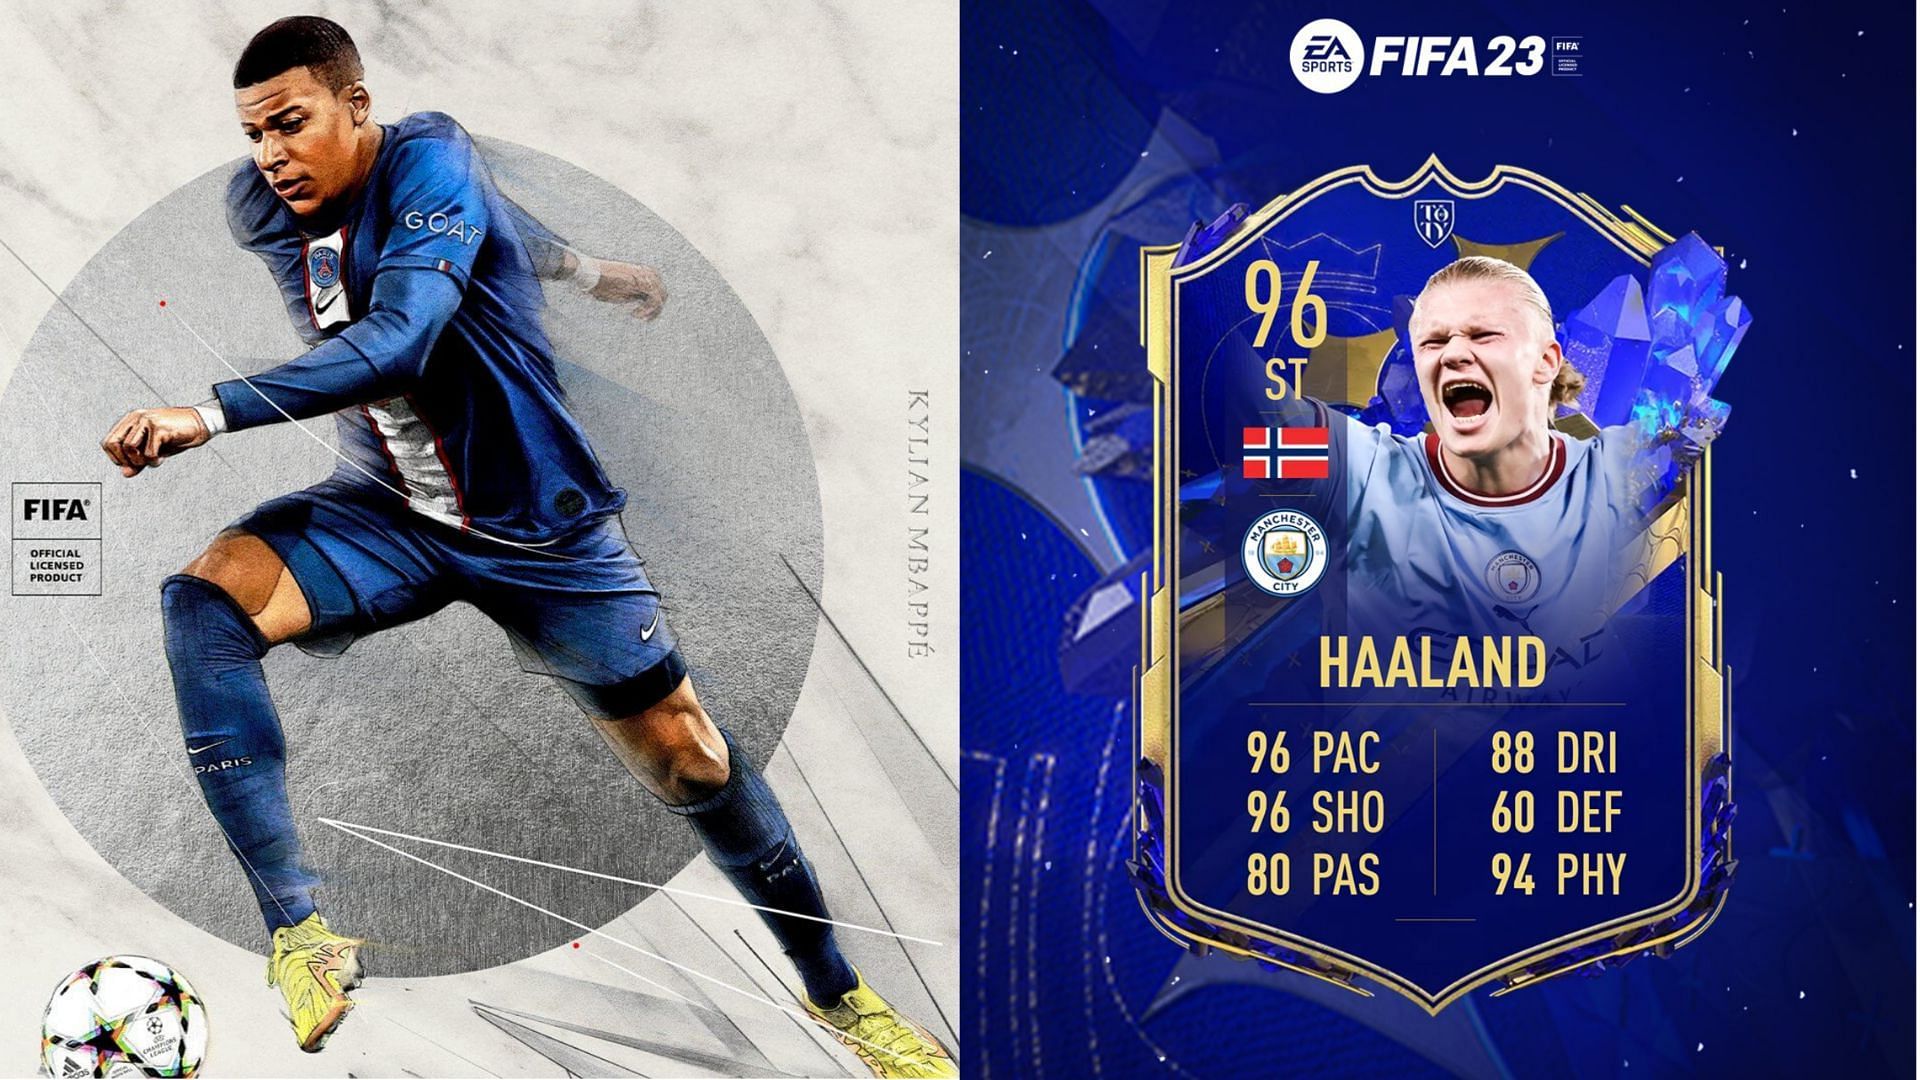 FIFA 23 leaks reveal official stats of Erling Haaland TOTY card in